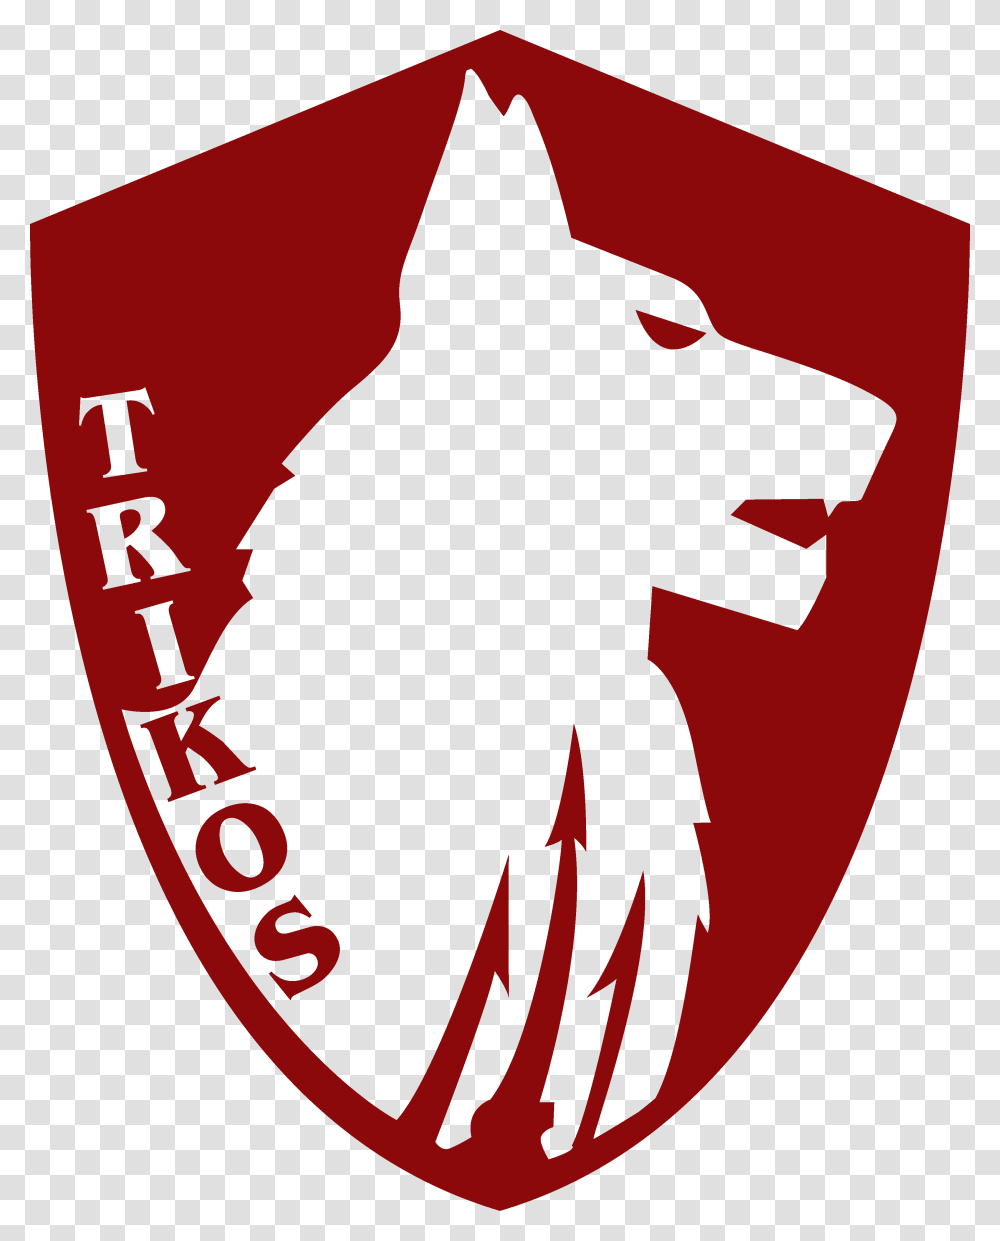 Mike Ritland Logo Trikos Team Dog, First Aid, Trademark, Red Cross Transparent Png